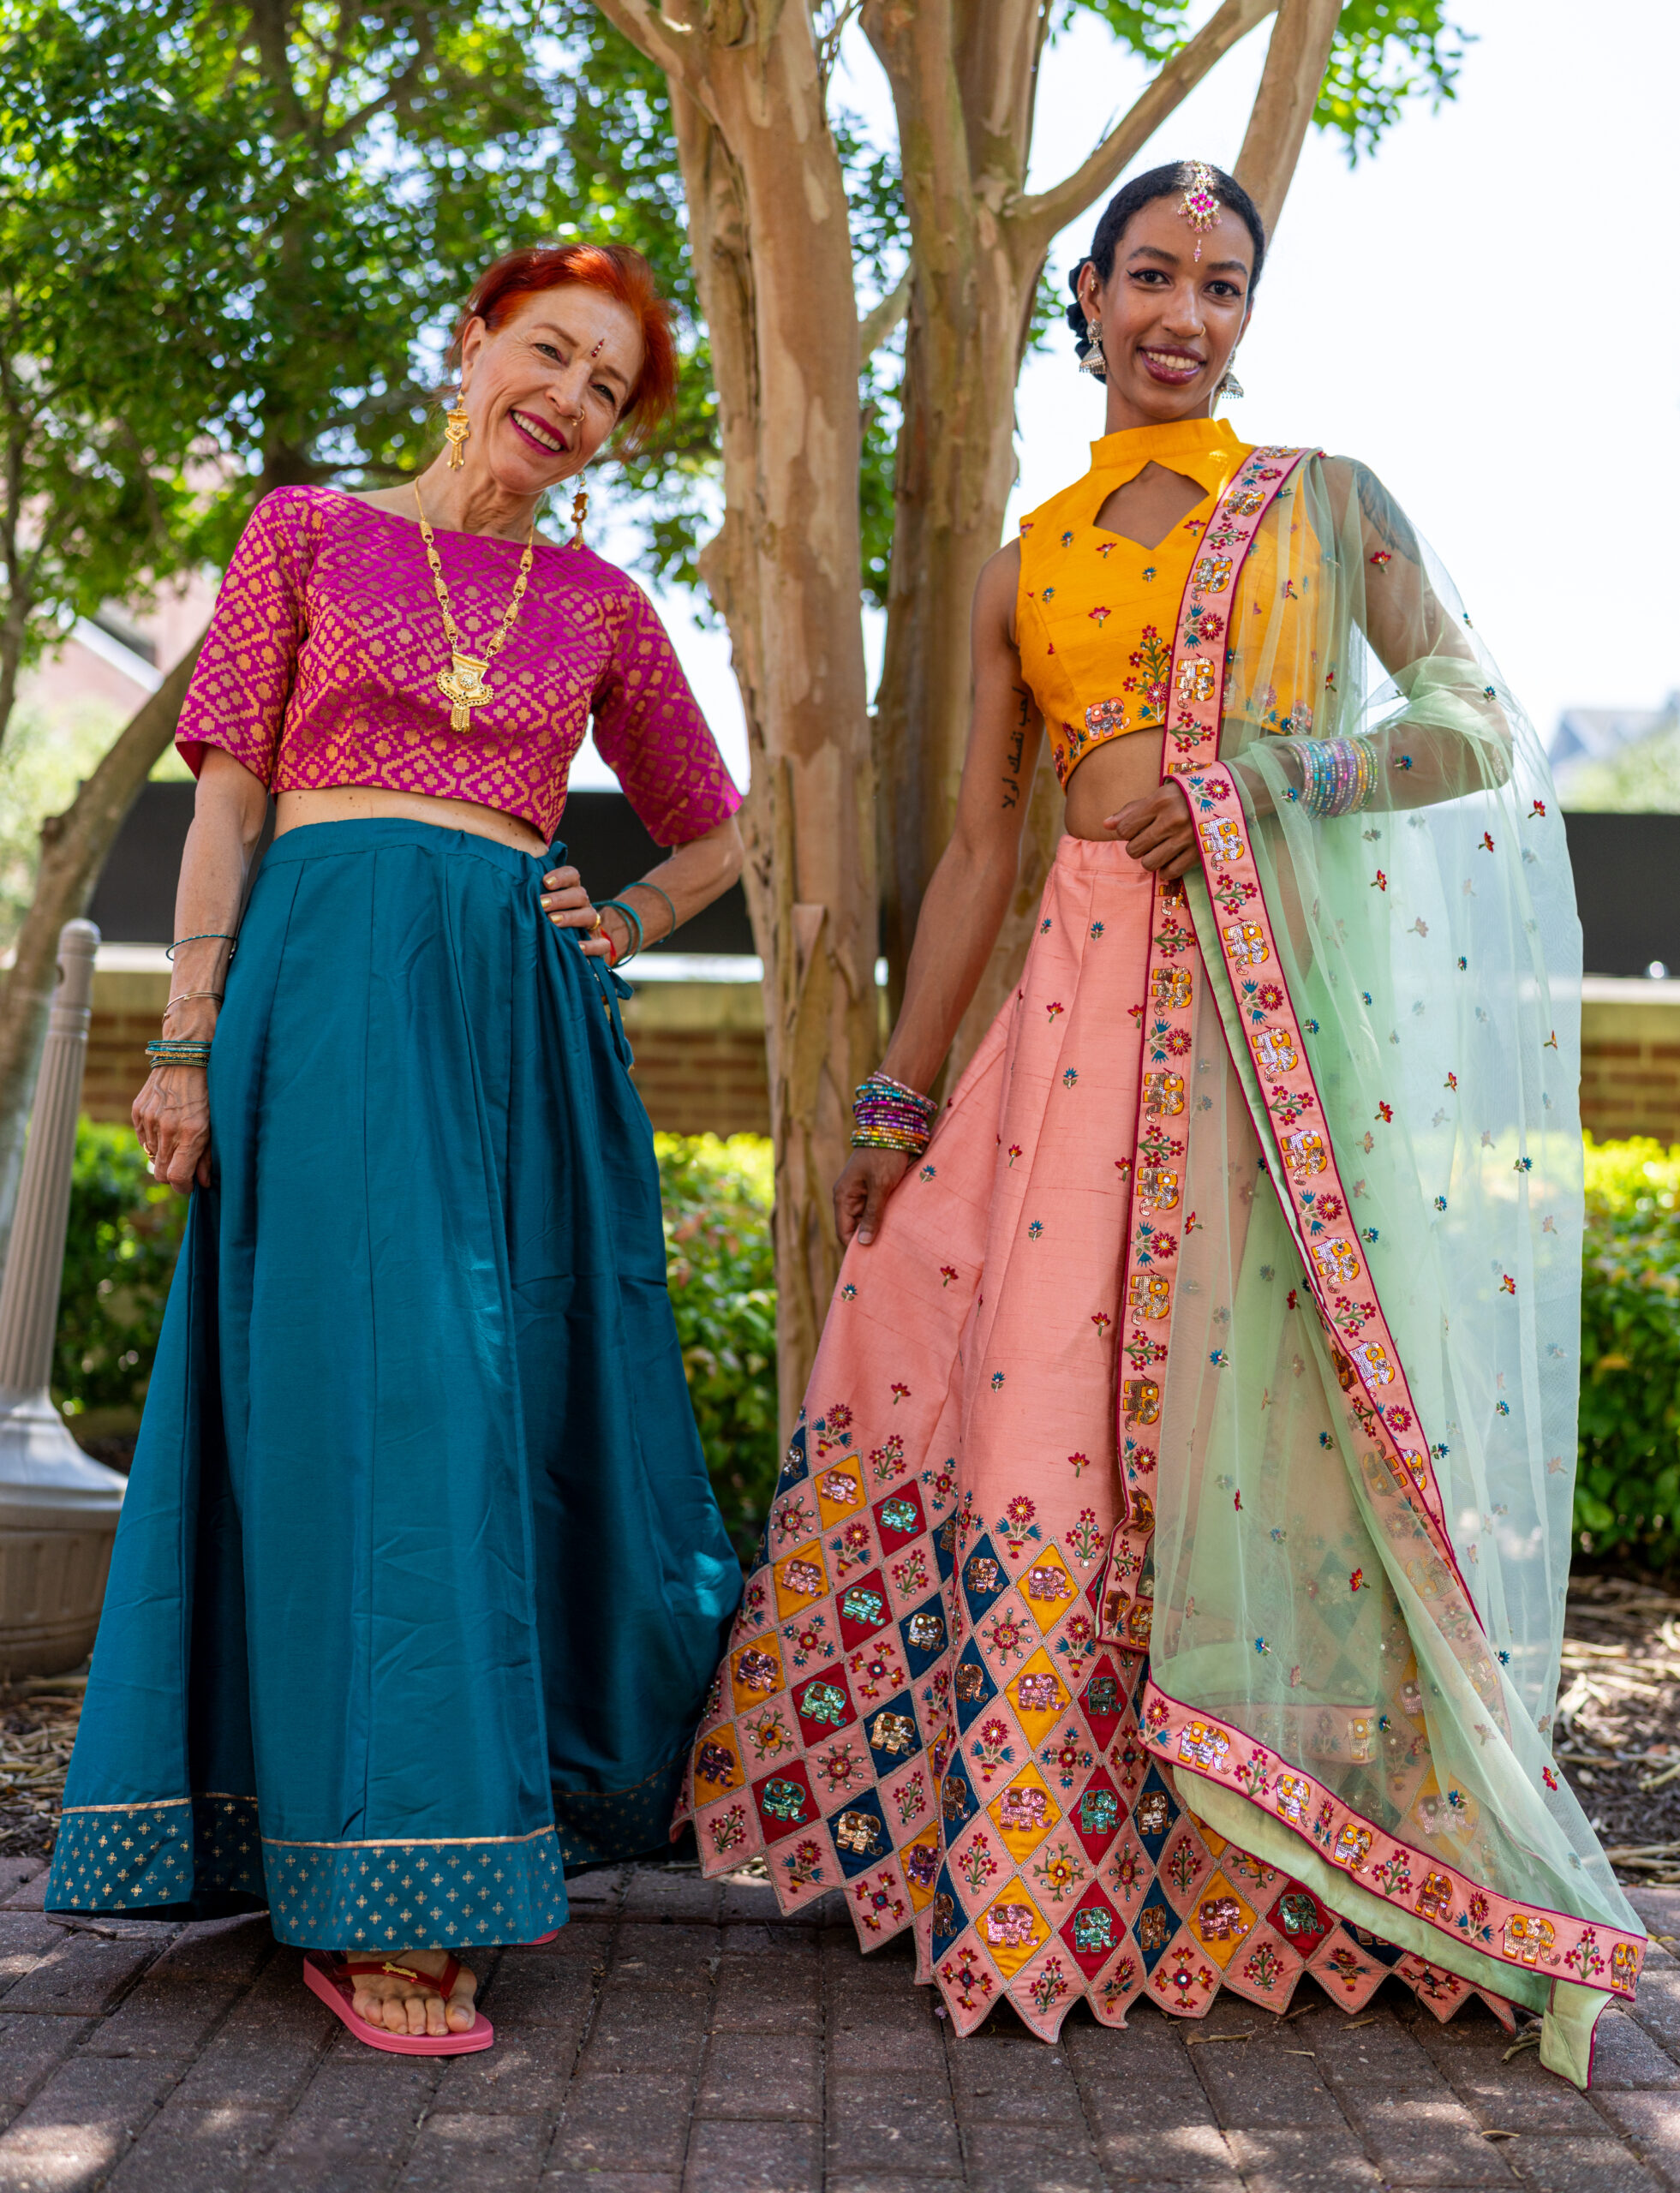 Two dancers posing with elaborate costumes in pink and green in museum garden.